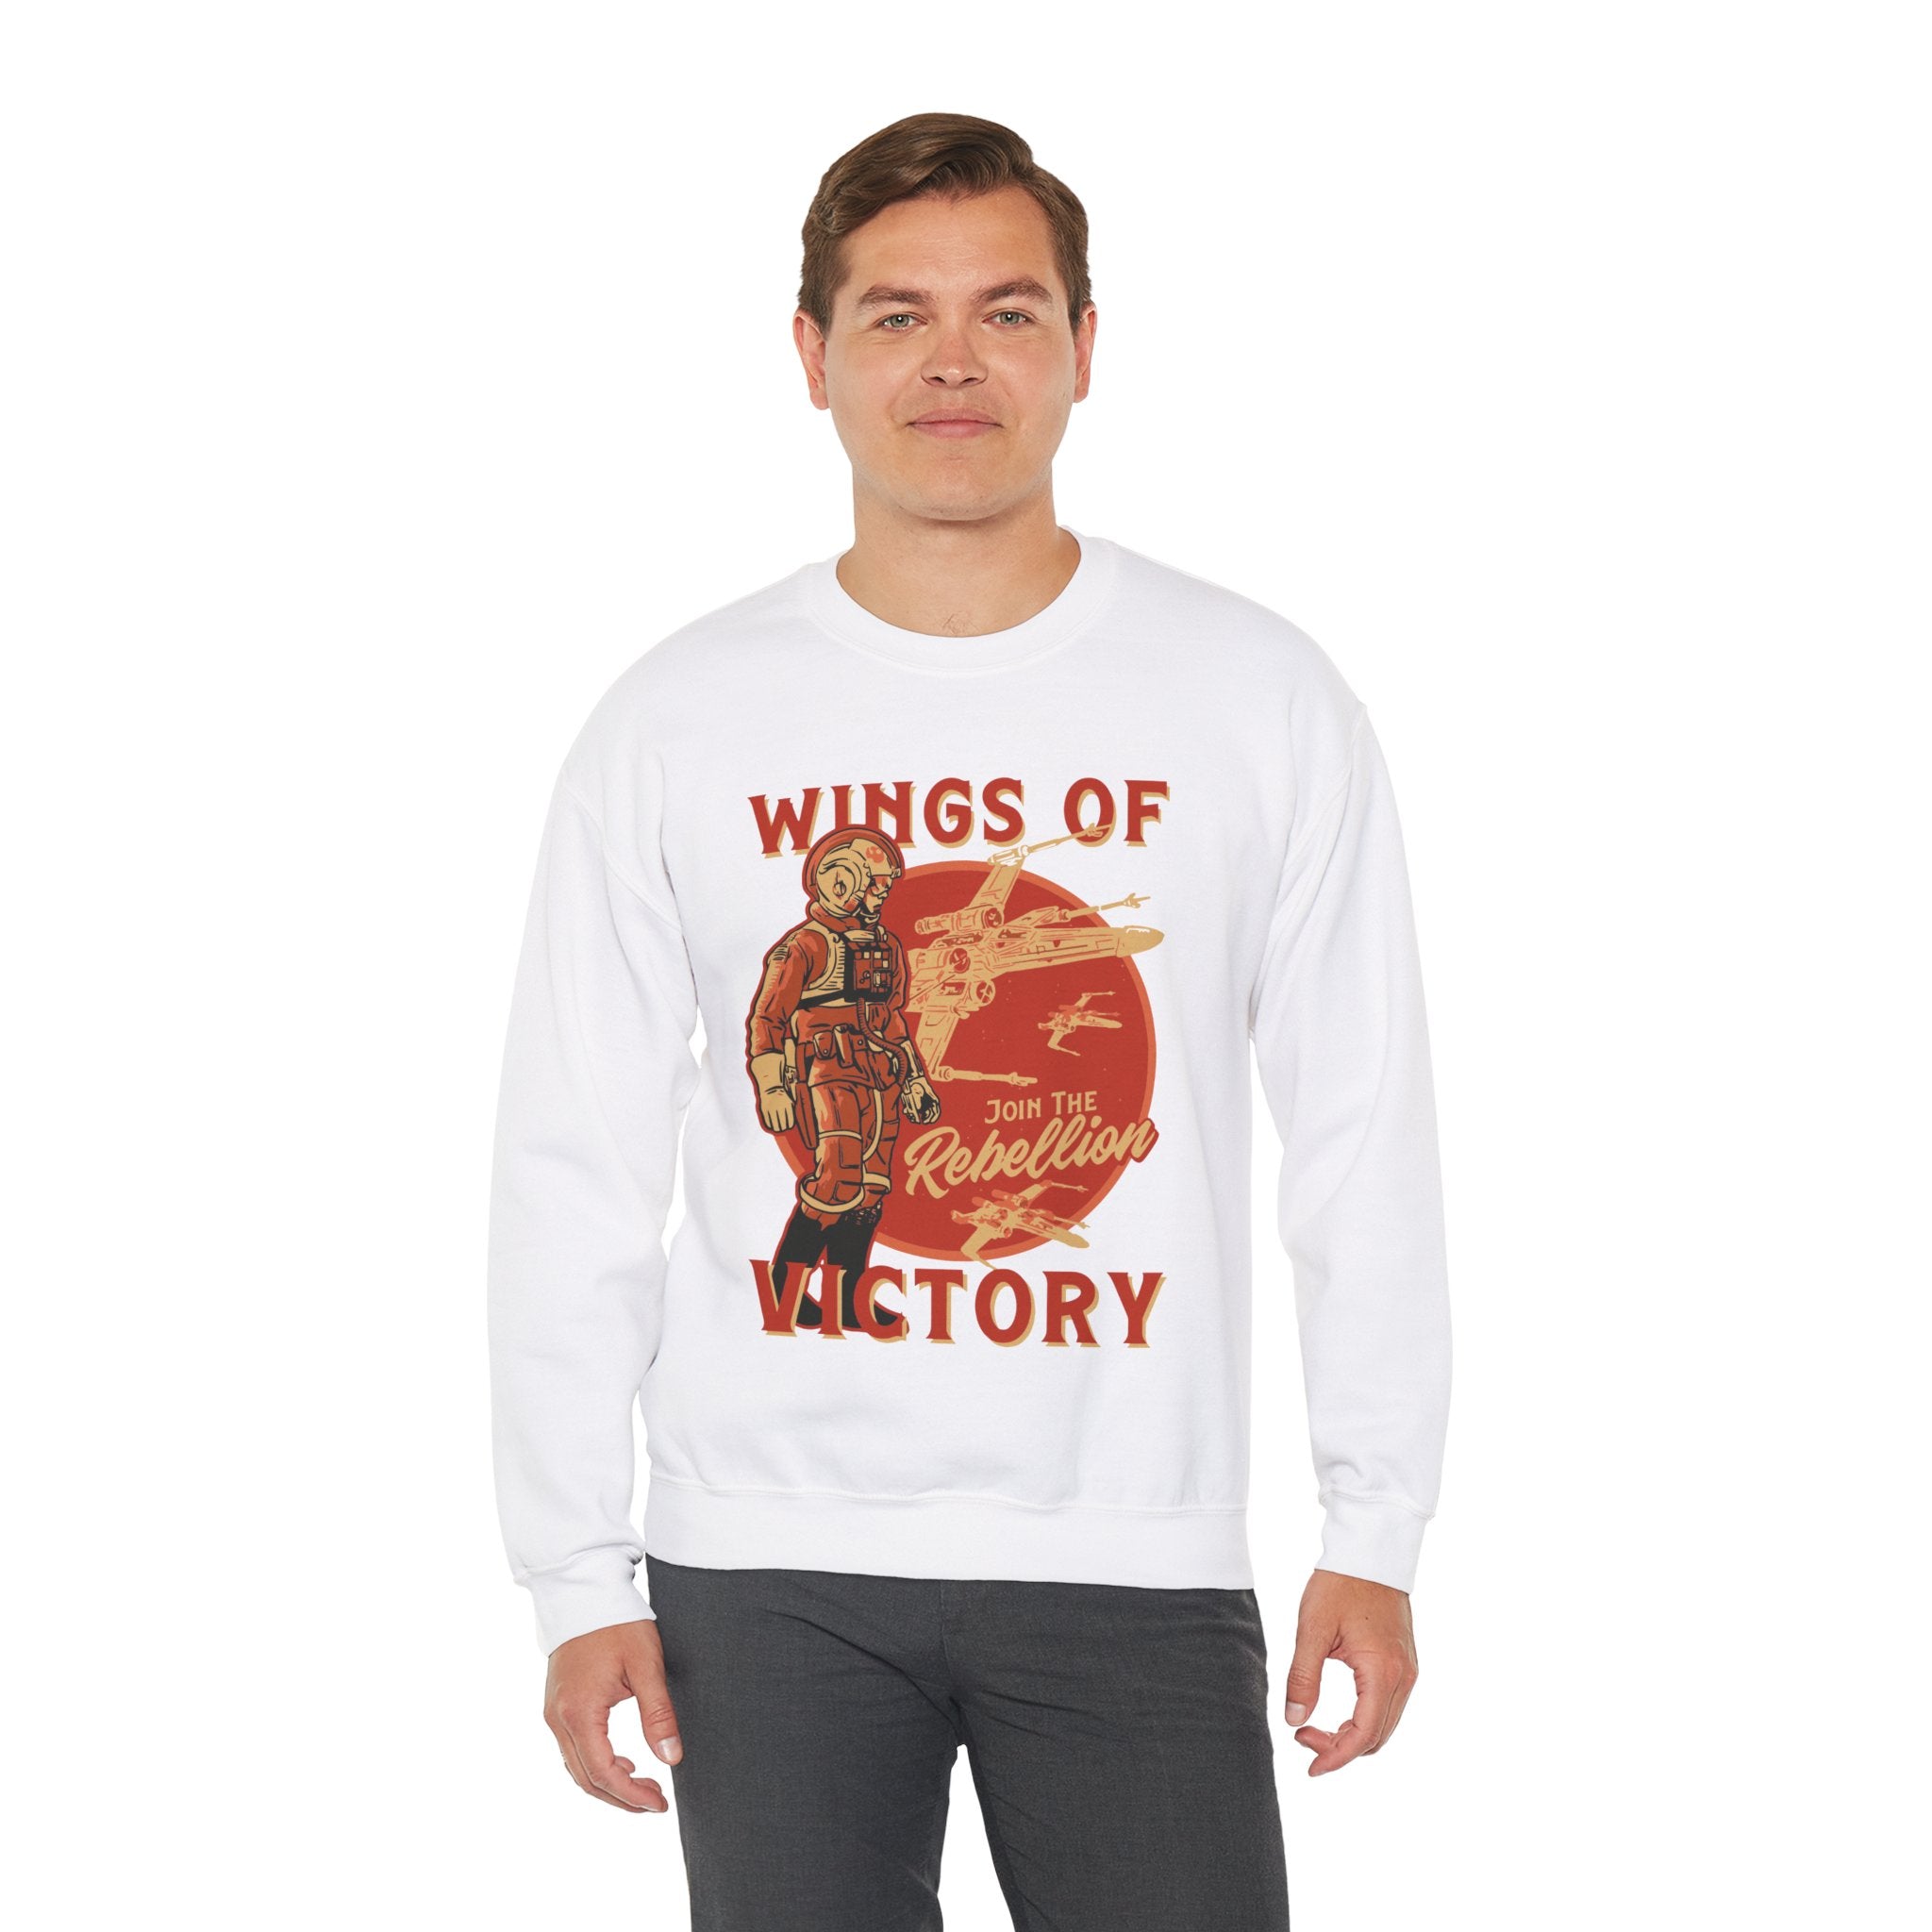 A person wearing a Wings of Victory - Sweatshirt, featuring a design with a character in a spacesuit and the text "Wings of Victory" and "Join the Rebellion," showcasing both comfort and style.